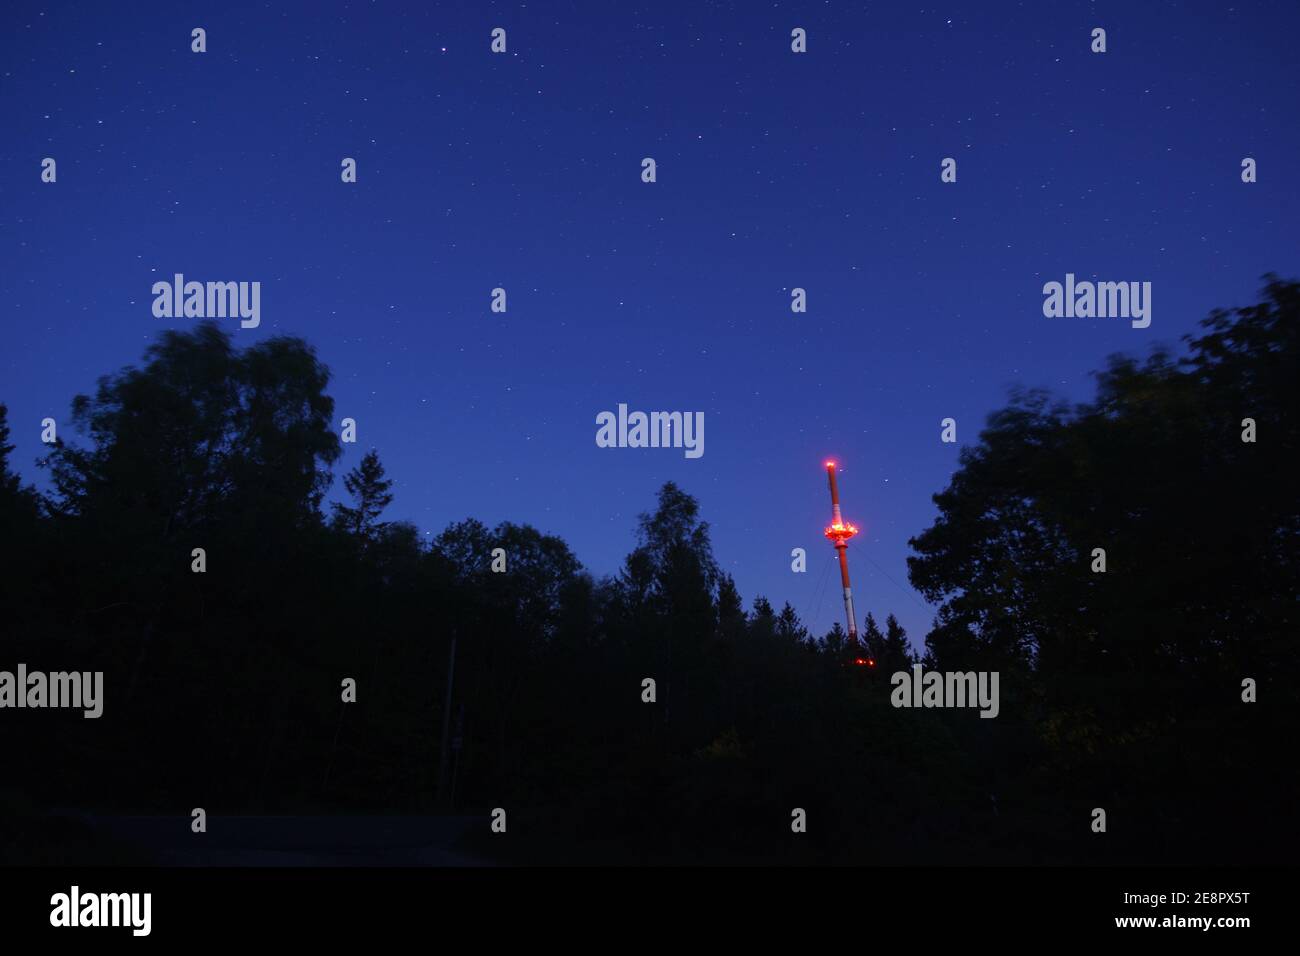 Radio tower at night with stars and silhouette of trees in the forest Stock Photo